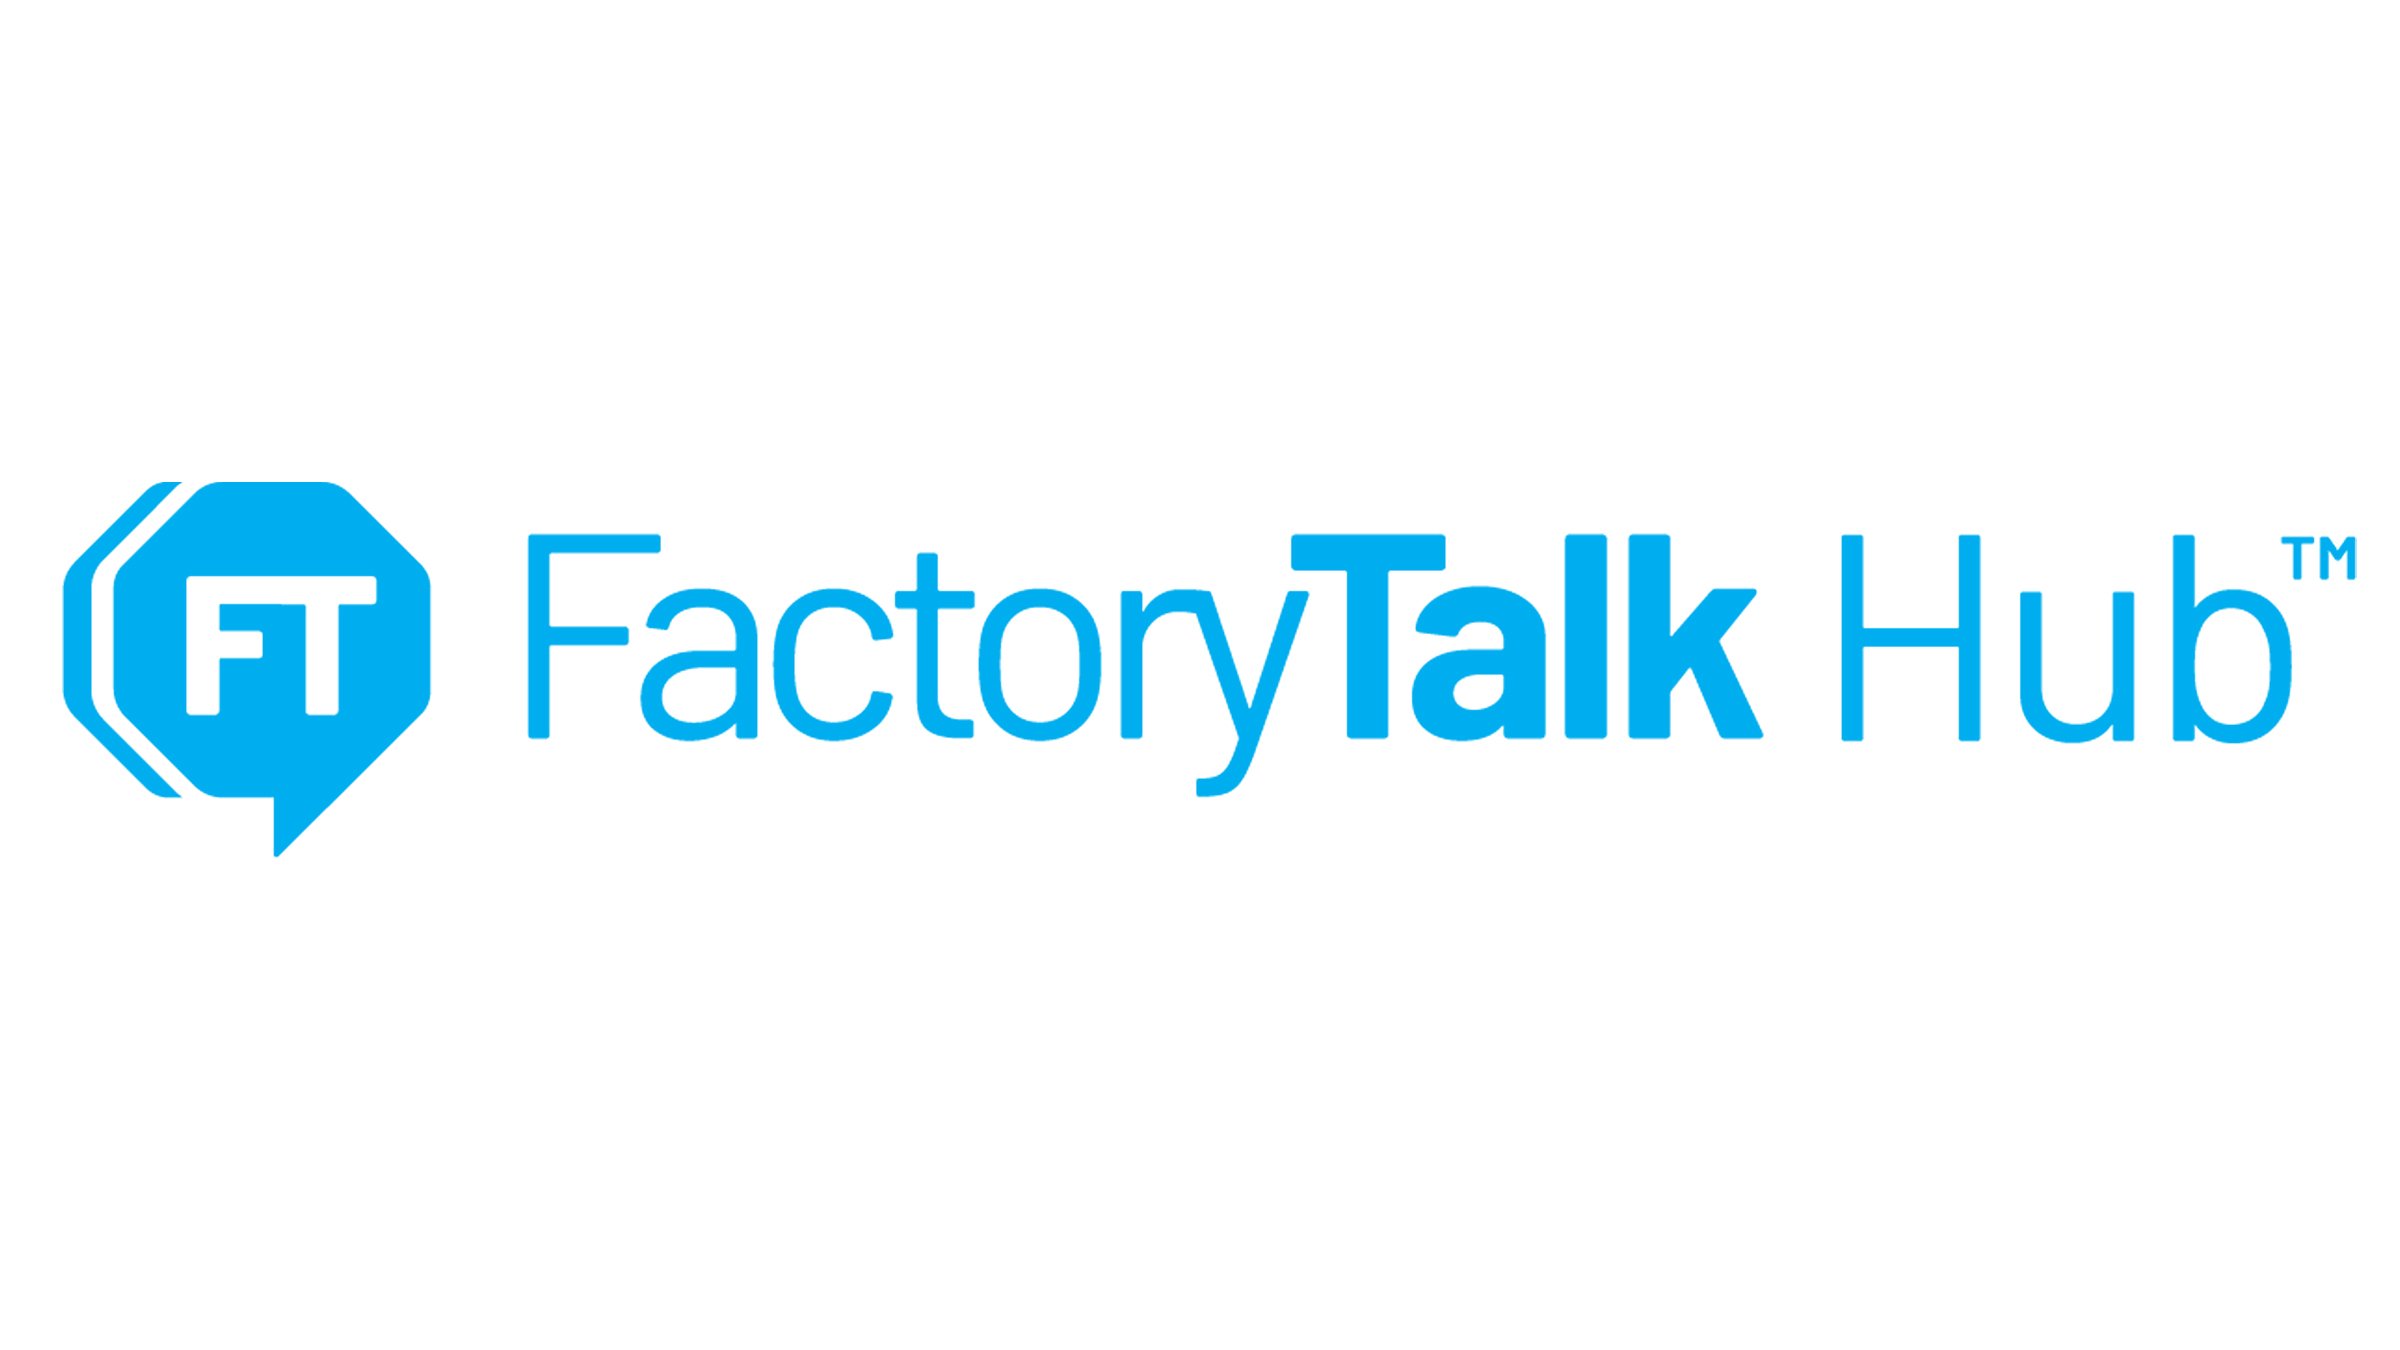 FactoryTalk Hub is a complete SaaS ecosystem for your entire system lifecycle across design, operations and maintenance.